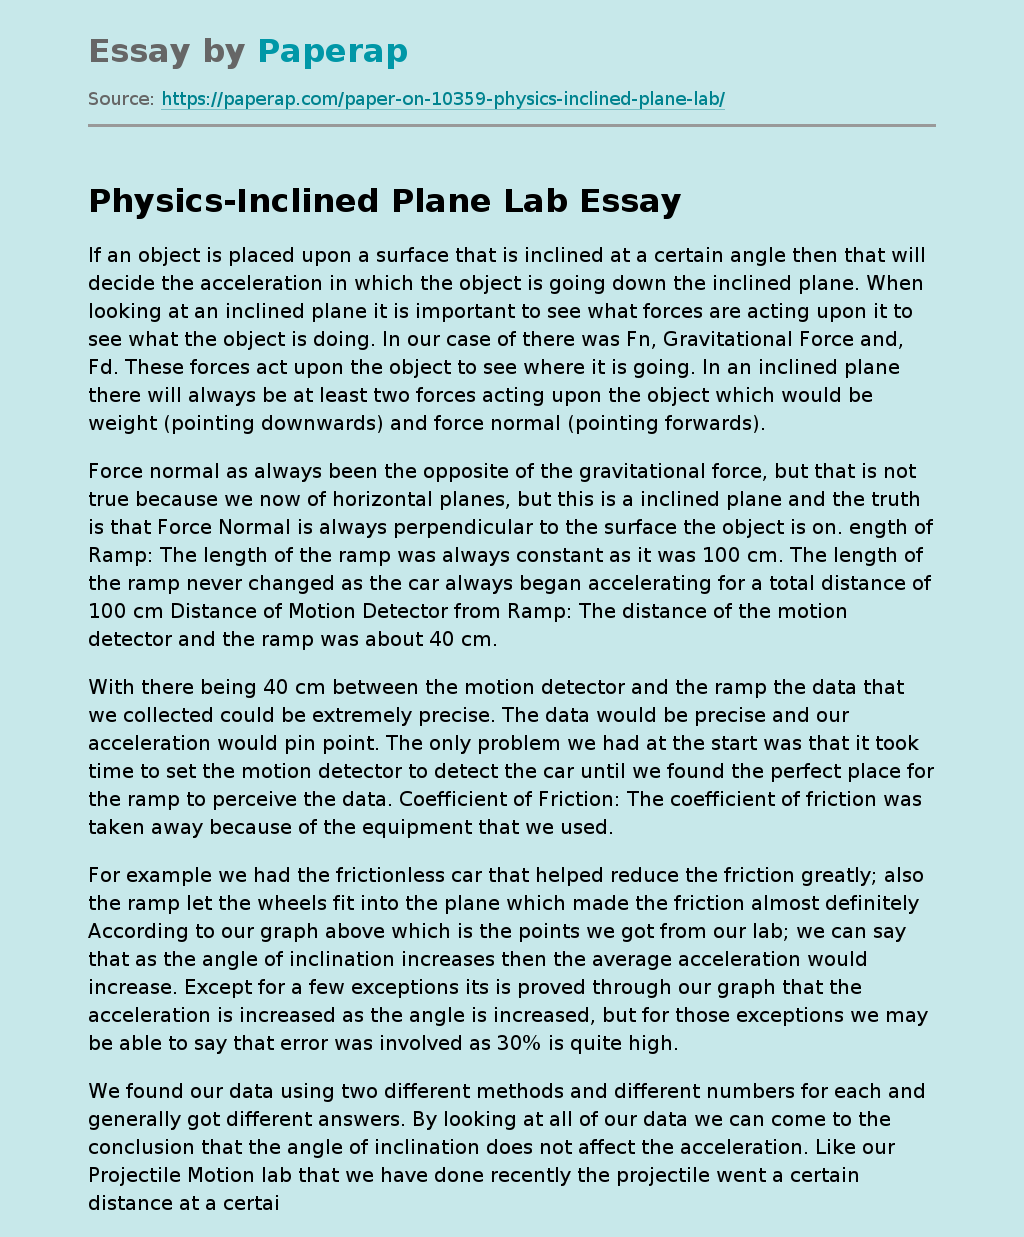 Physics-Inclined Plane Lab